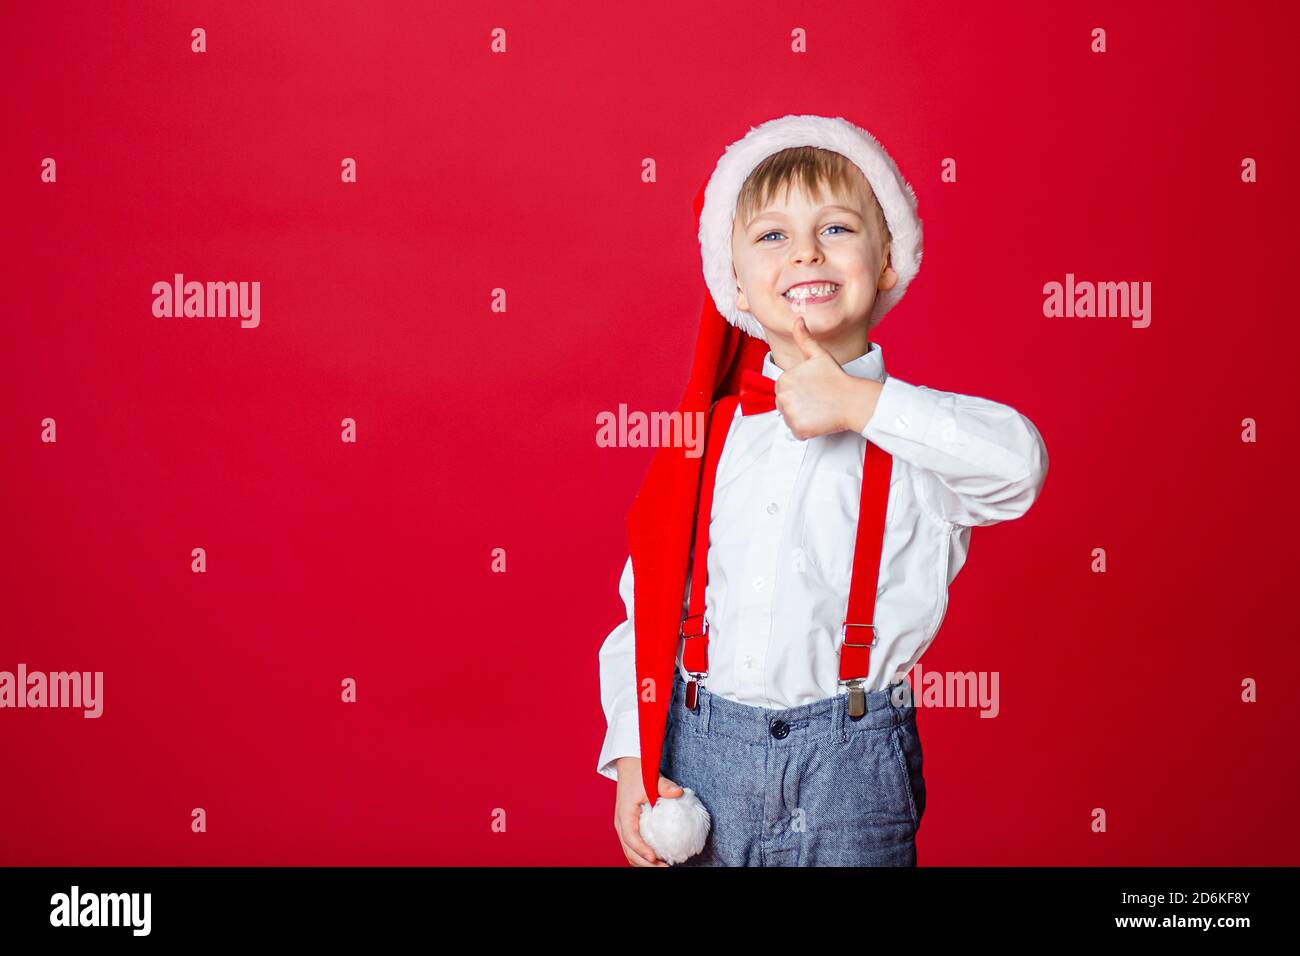 Merry Christmas. Cute cheerful little boy in Santa Claus hat on red background. A happy childhood with dreams and gifts. Close-up of baby's open mouth Stock Photo